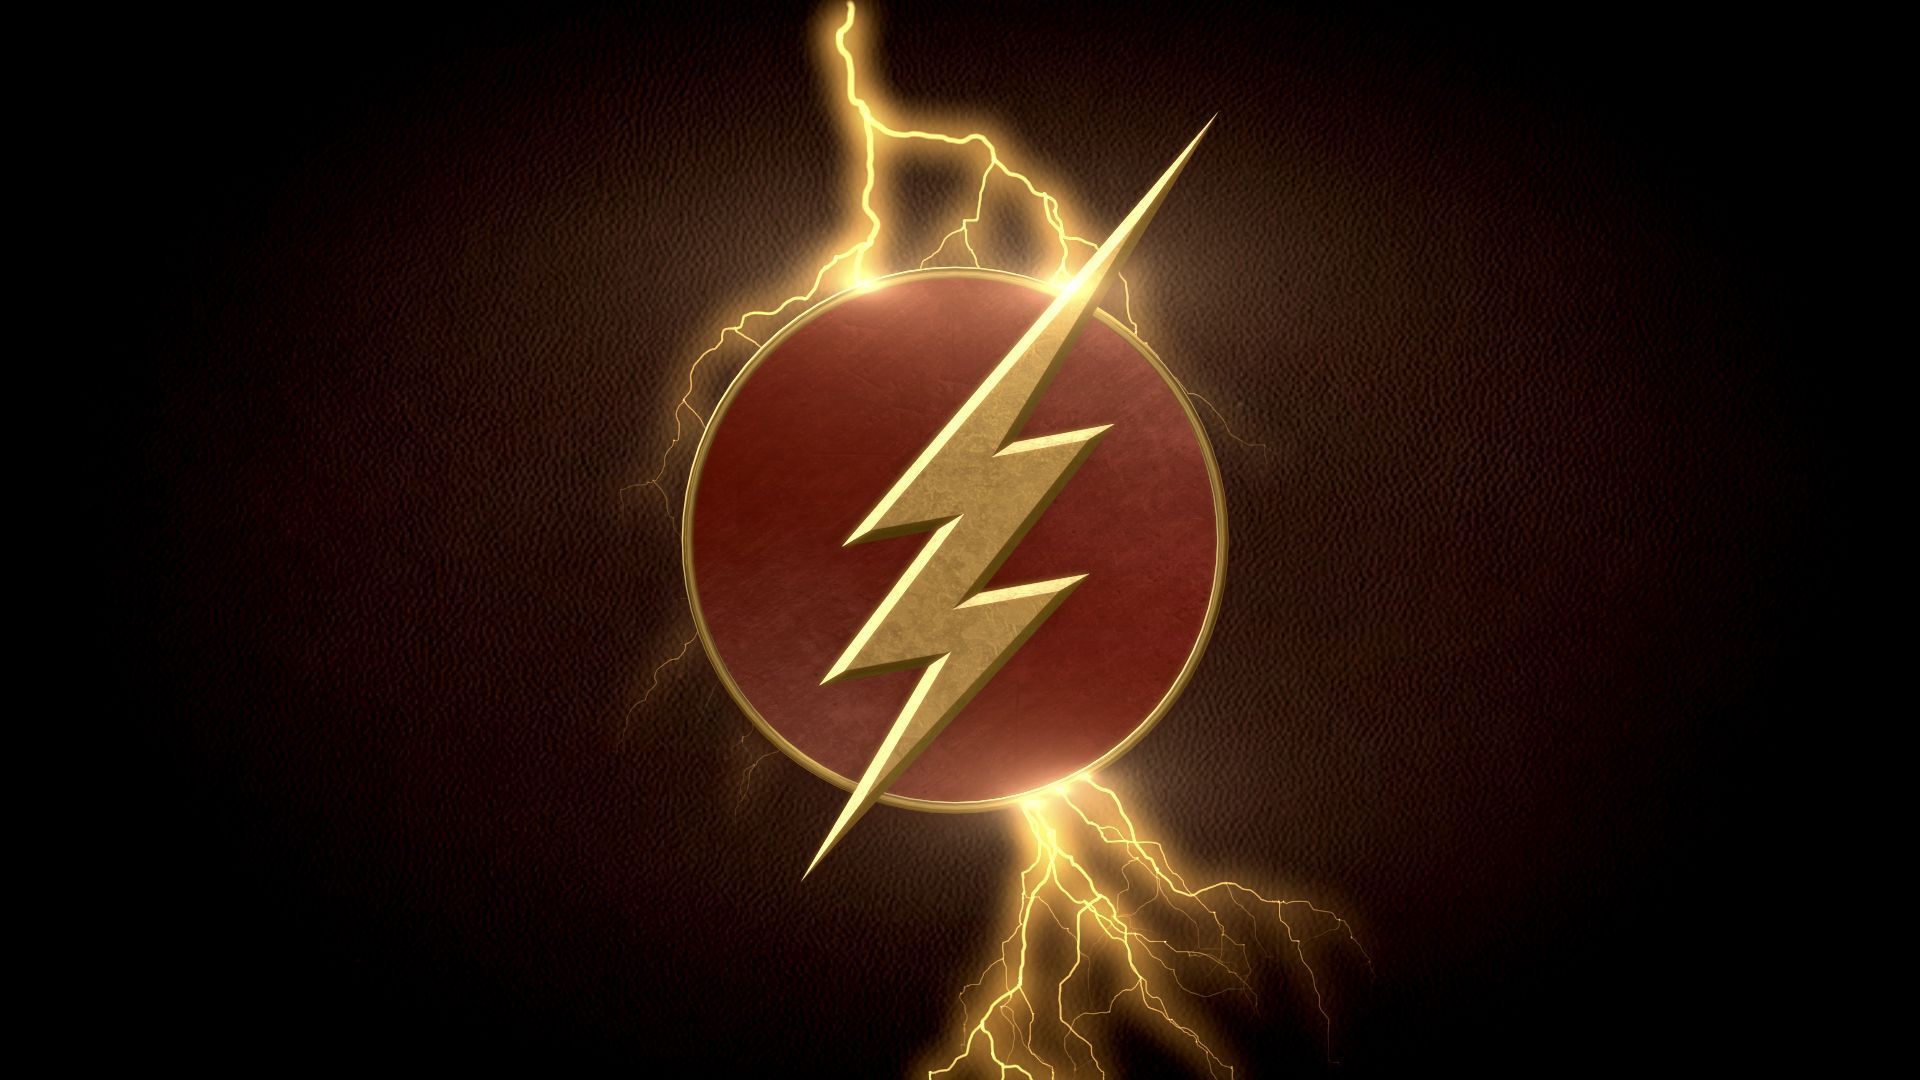 Heres a couple Flash wallpapers I made. 3840x1080 dual monitor